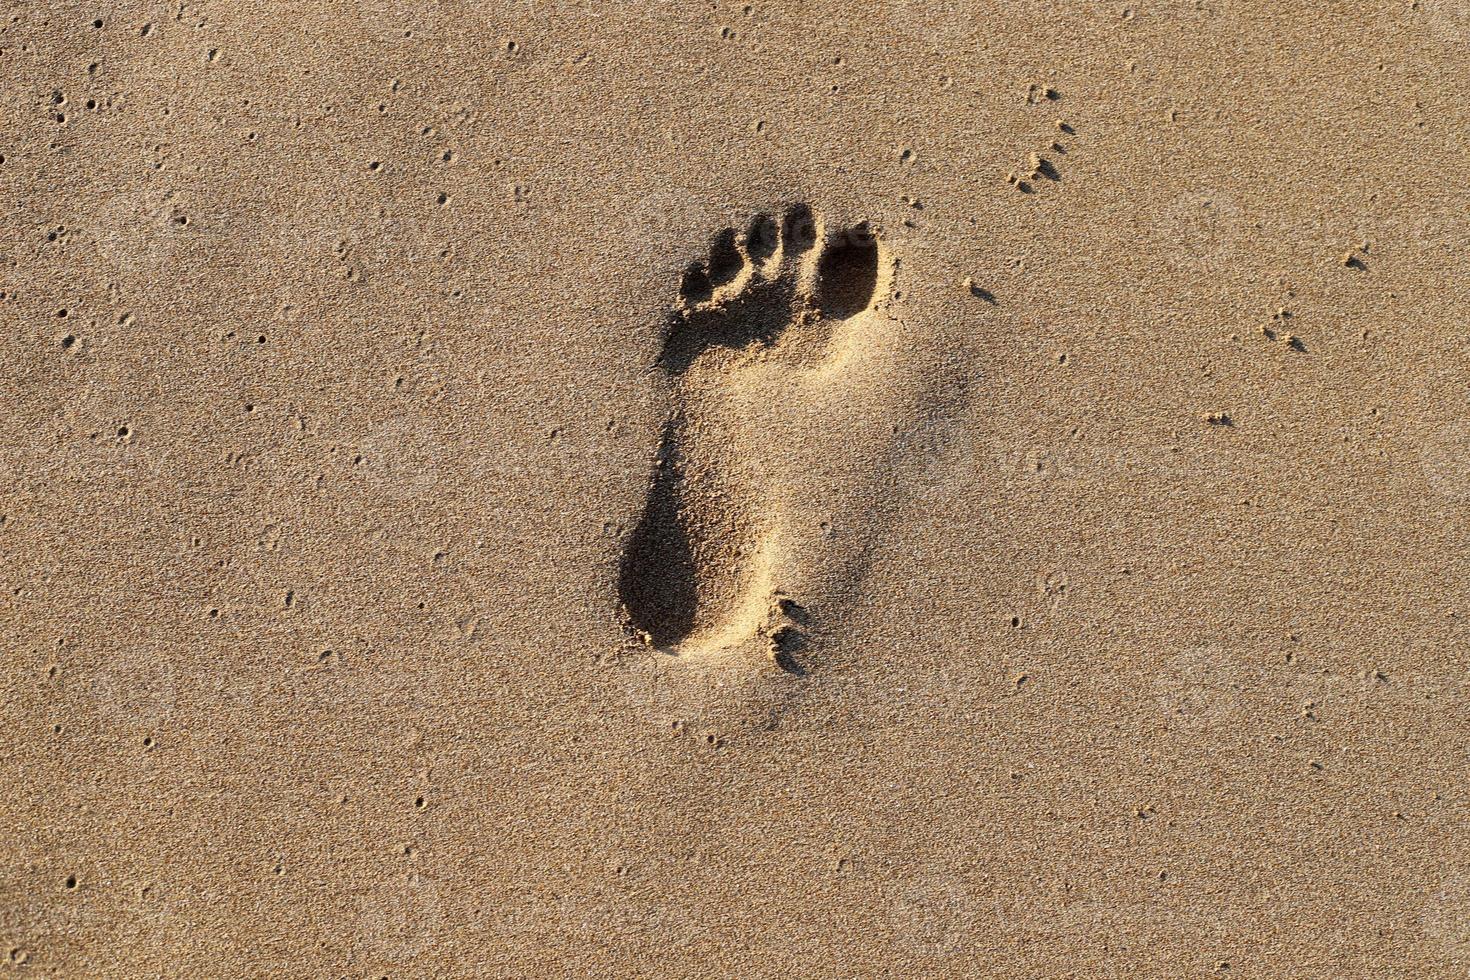 Footprints in the sand by the sea photo